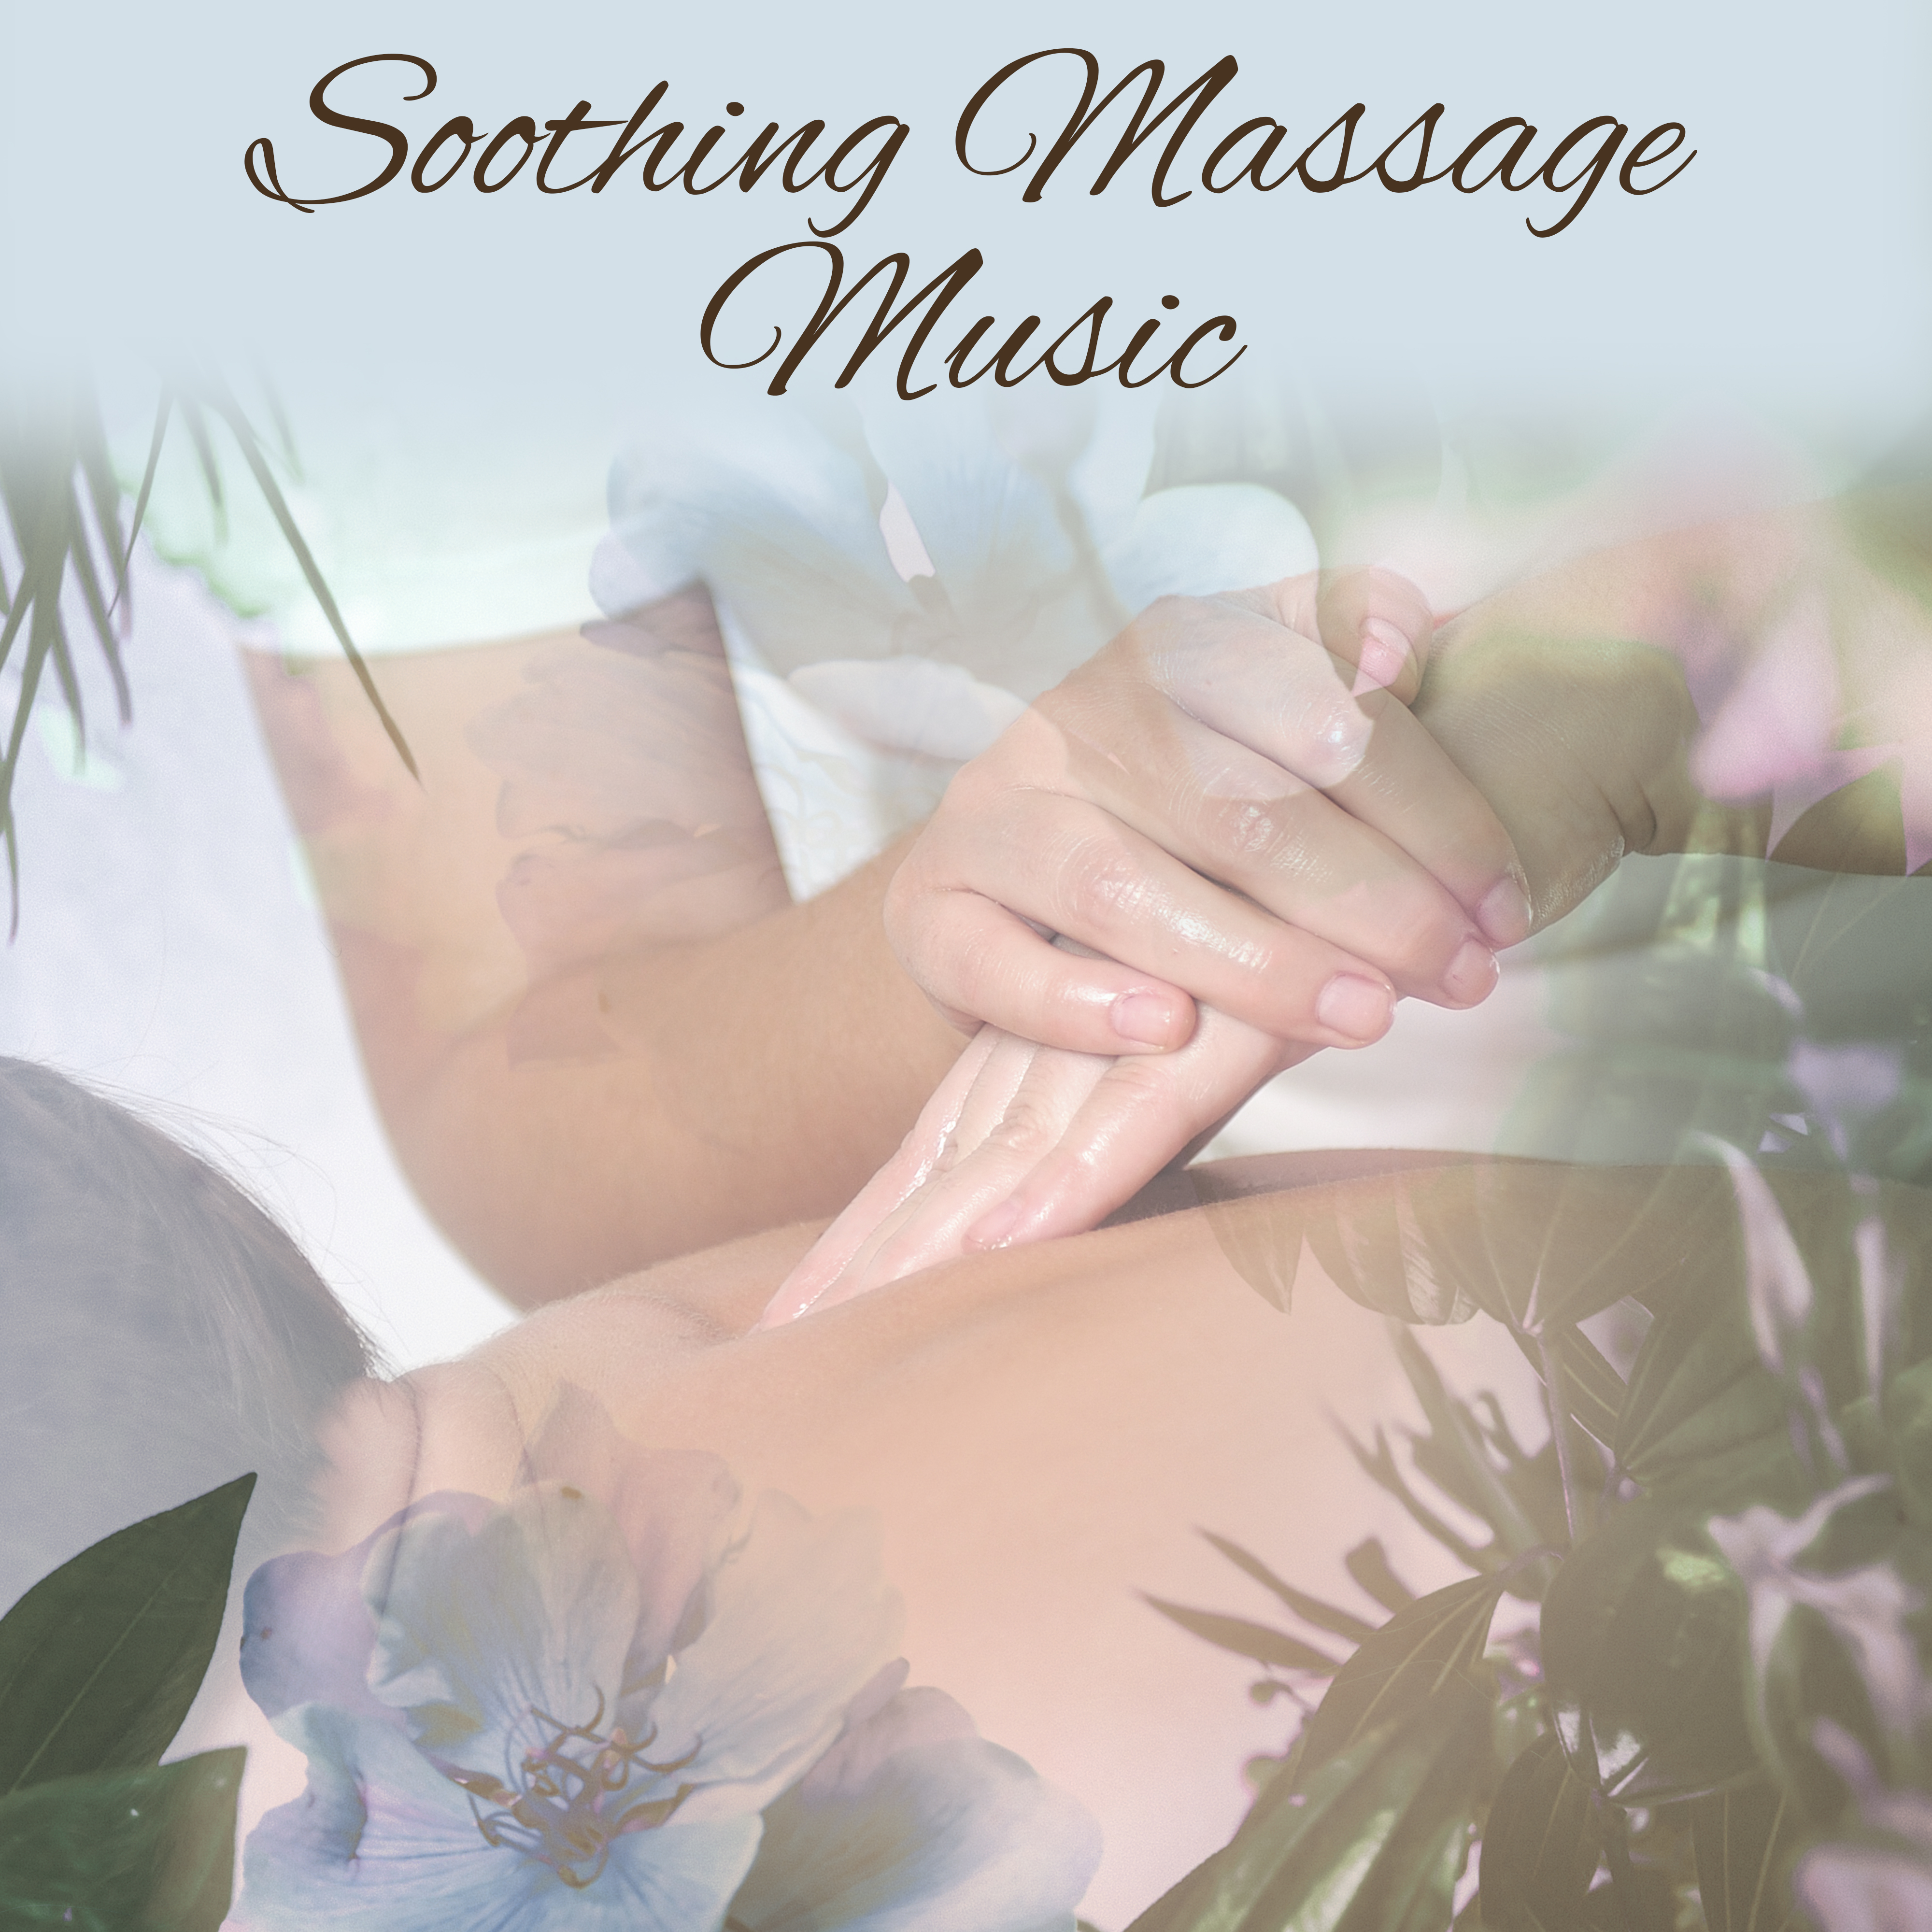 Soothing Massage Music  Relaxing Music for Massage, Relaxed Body  Mind, New Age Therapy Music